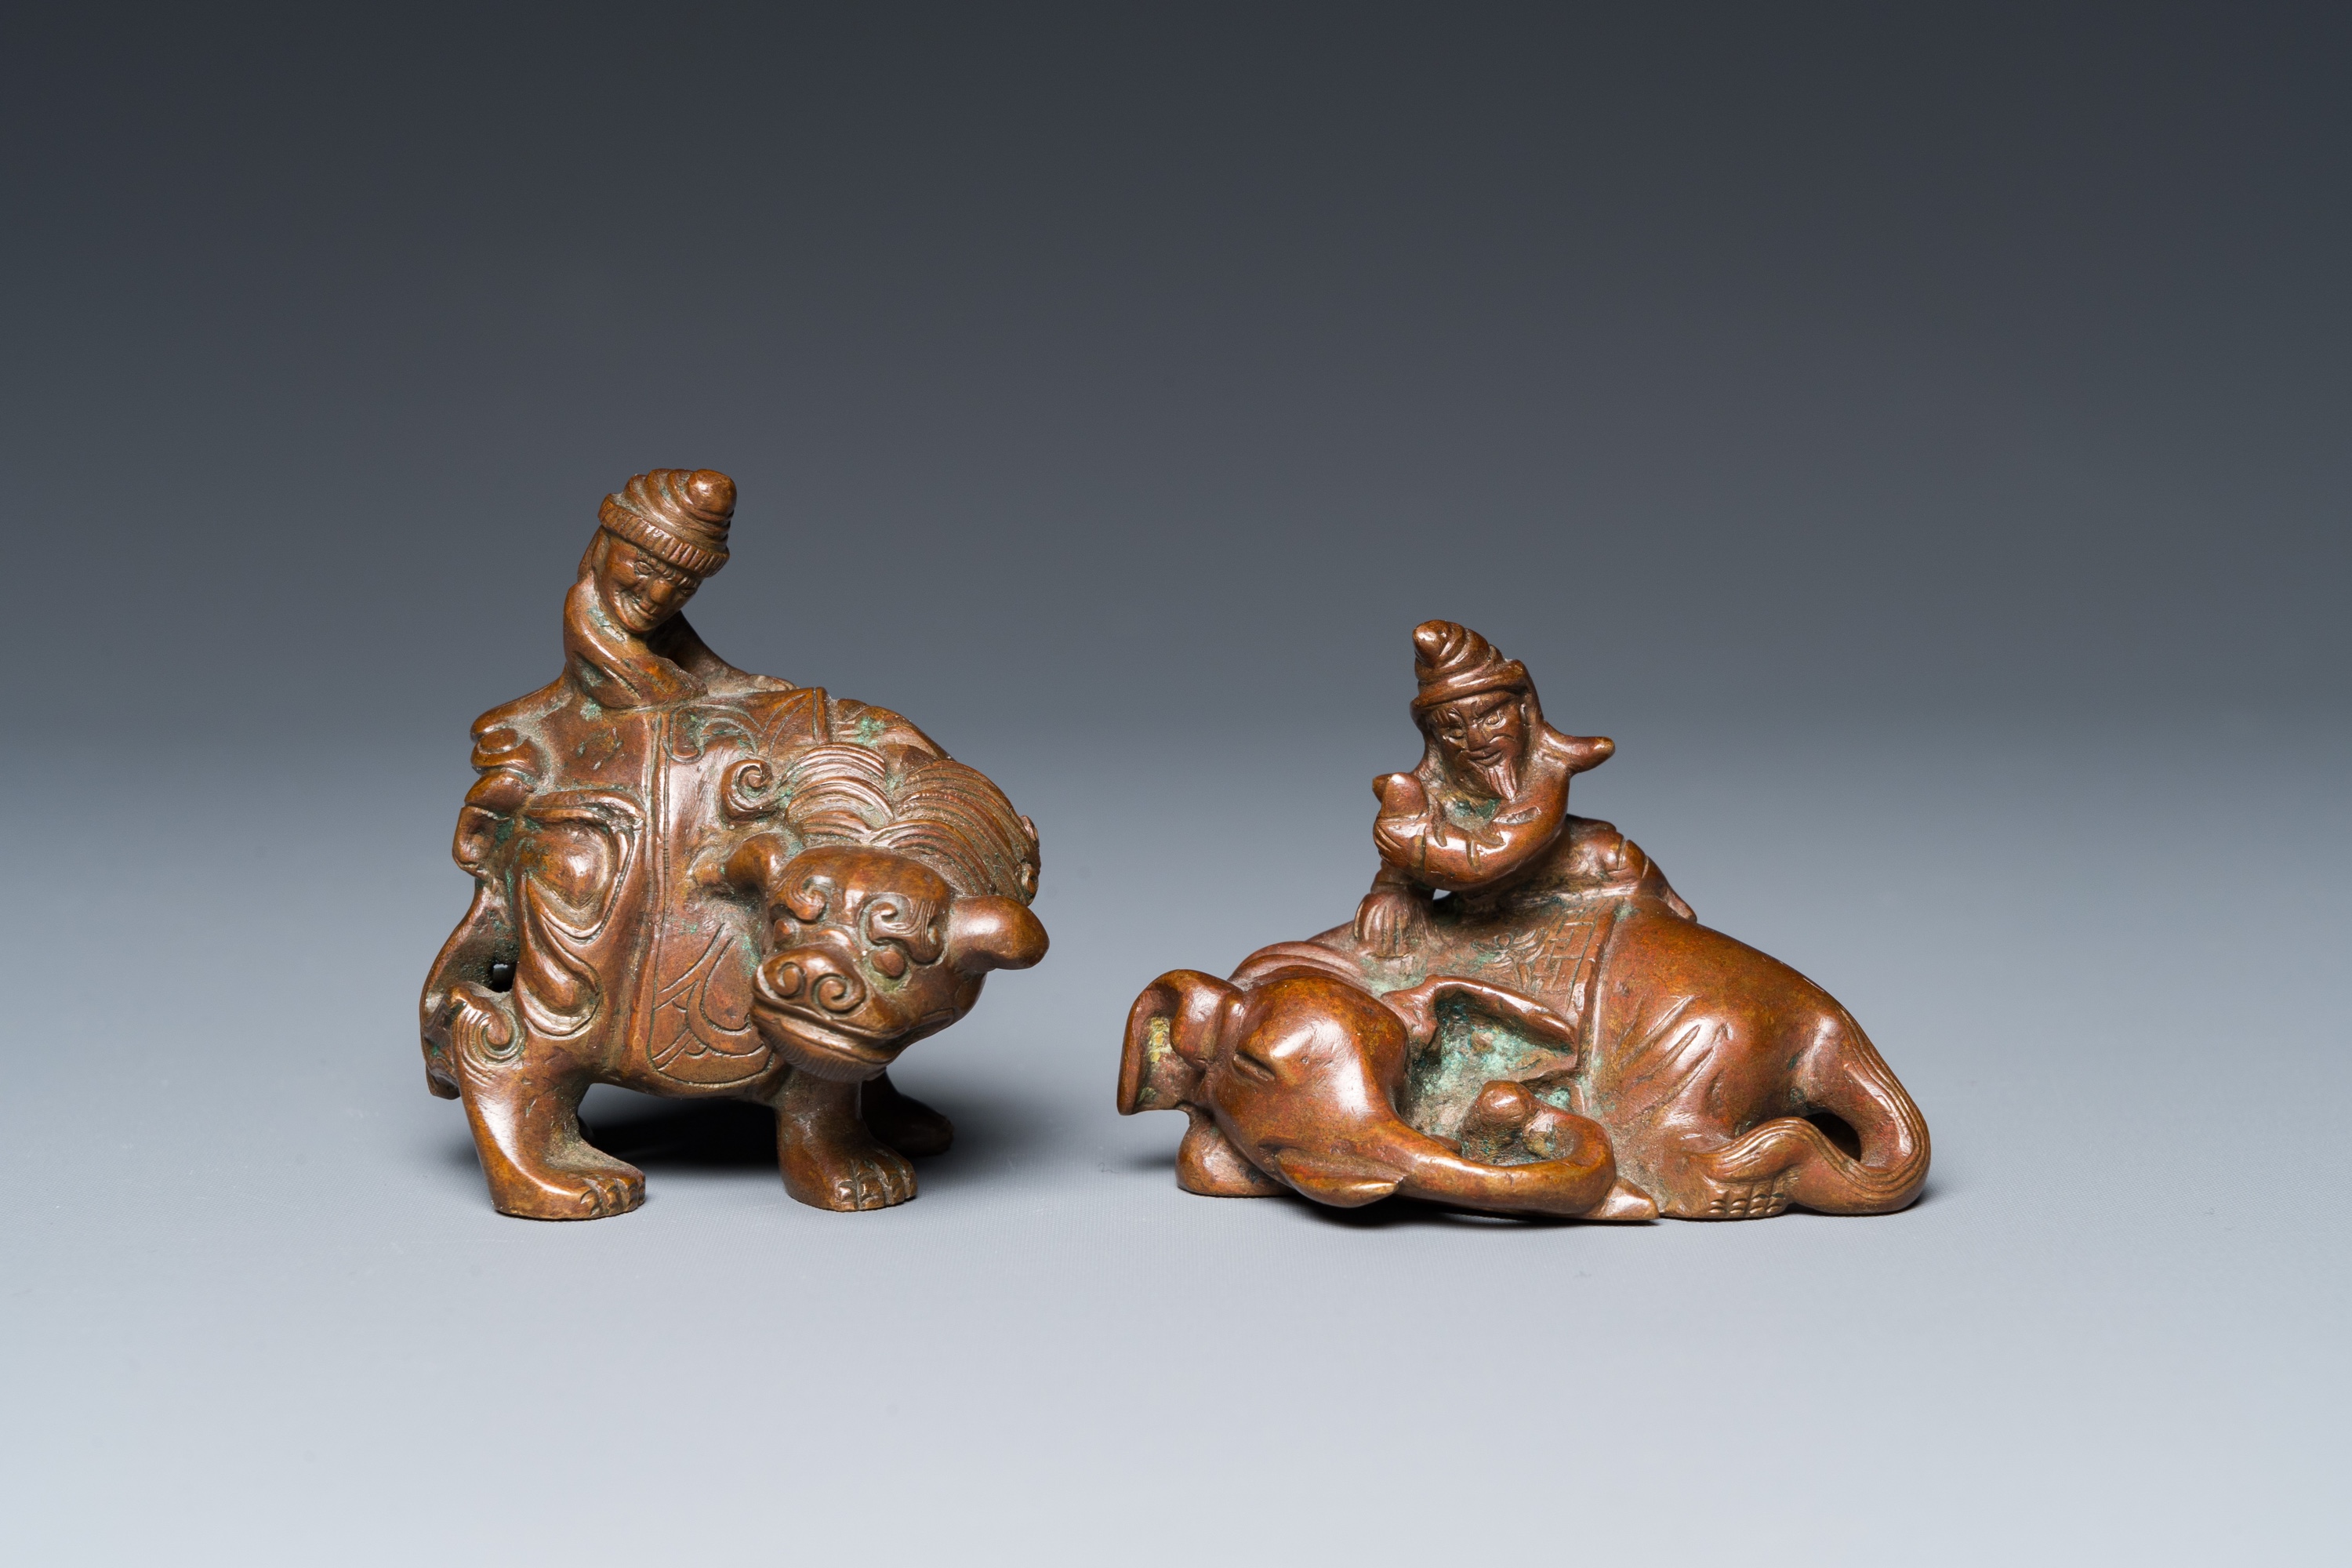 Two Chinese bronze scroll Weights with Sogdian riders on a Buddhist lion and an elephant, Qi